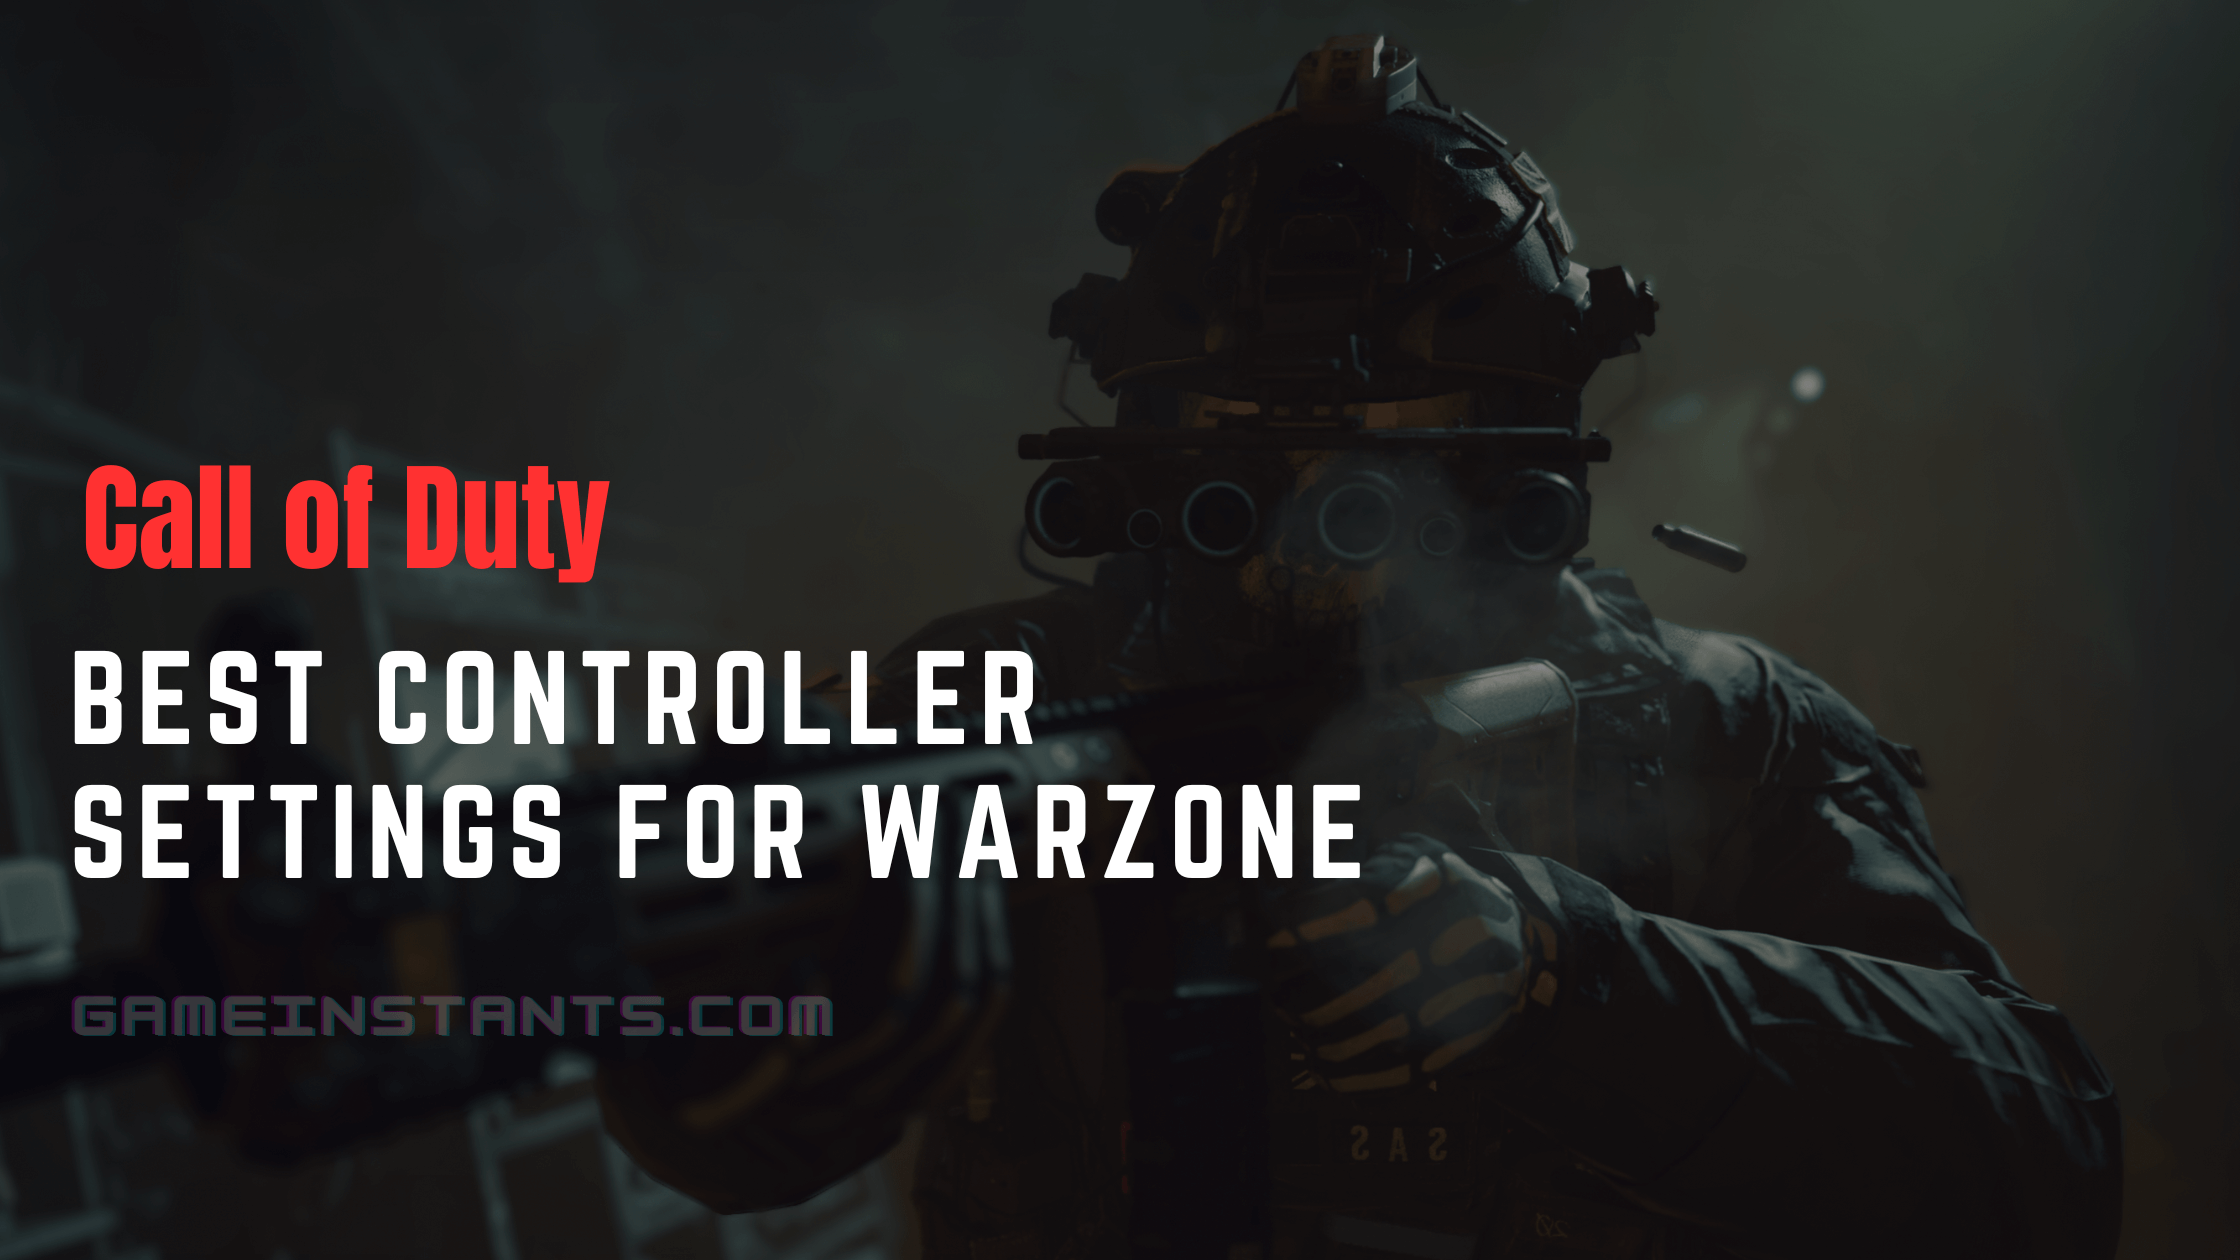 Best Controller settings for Warzone